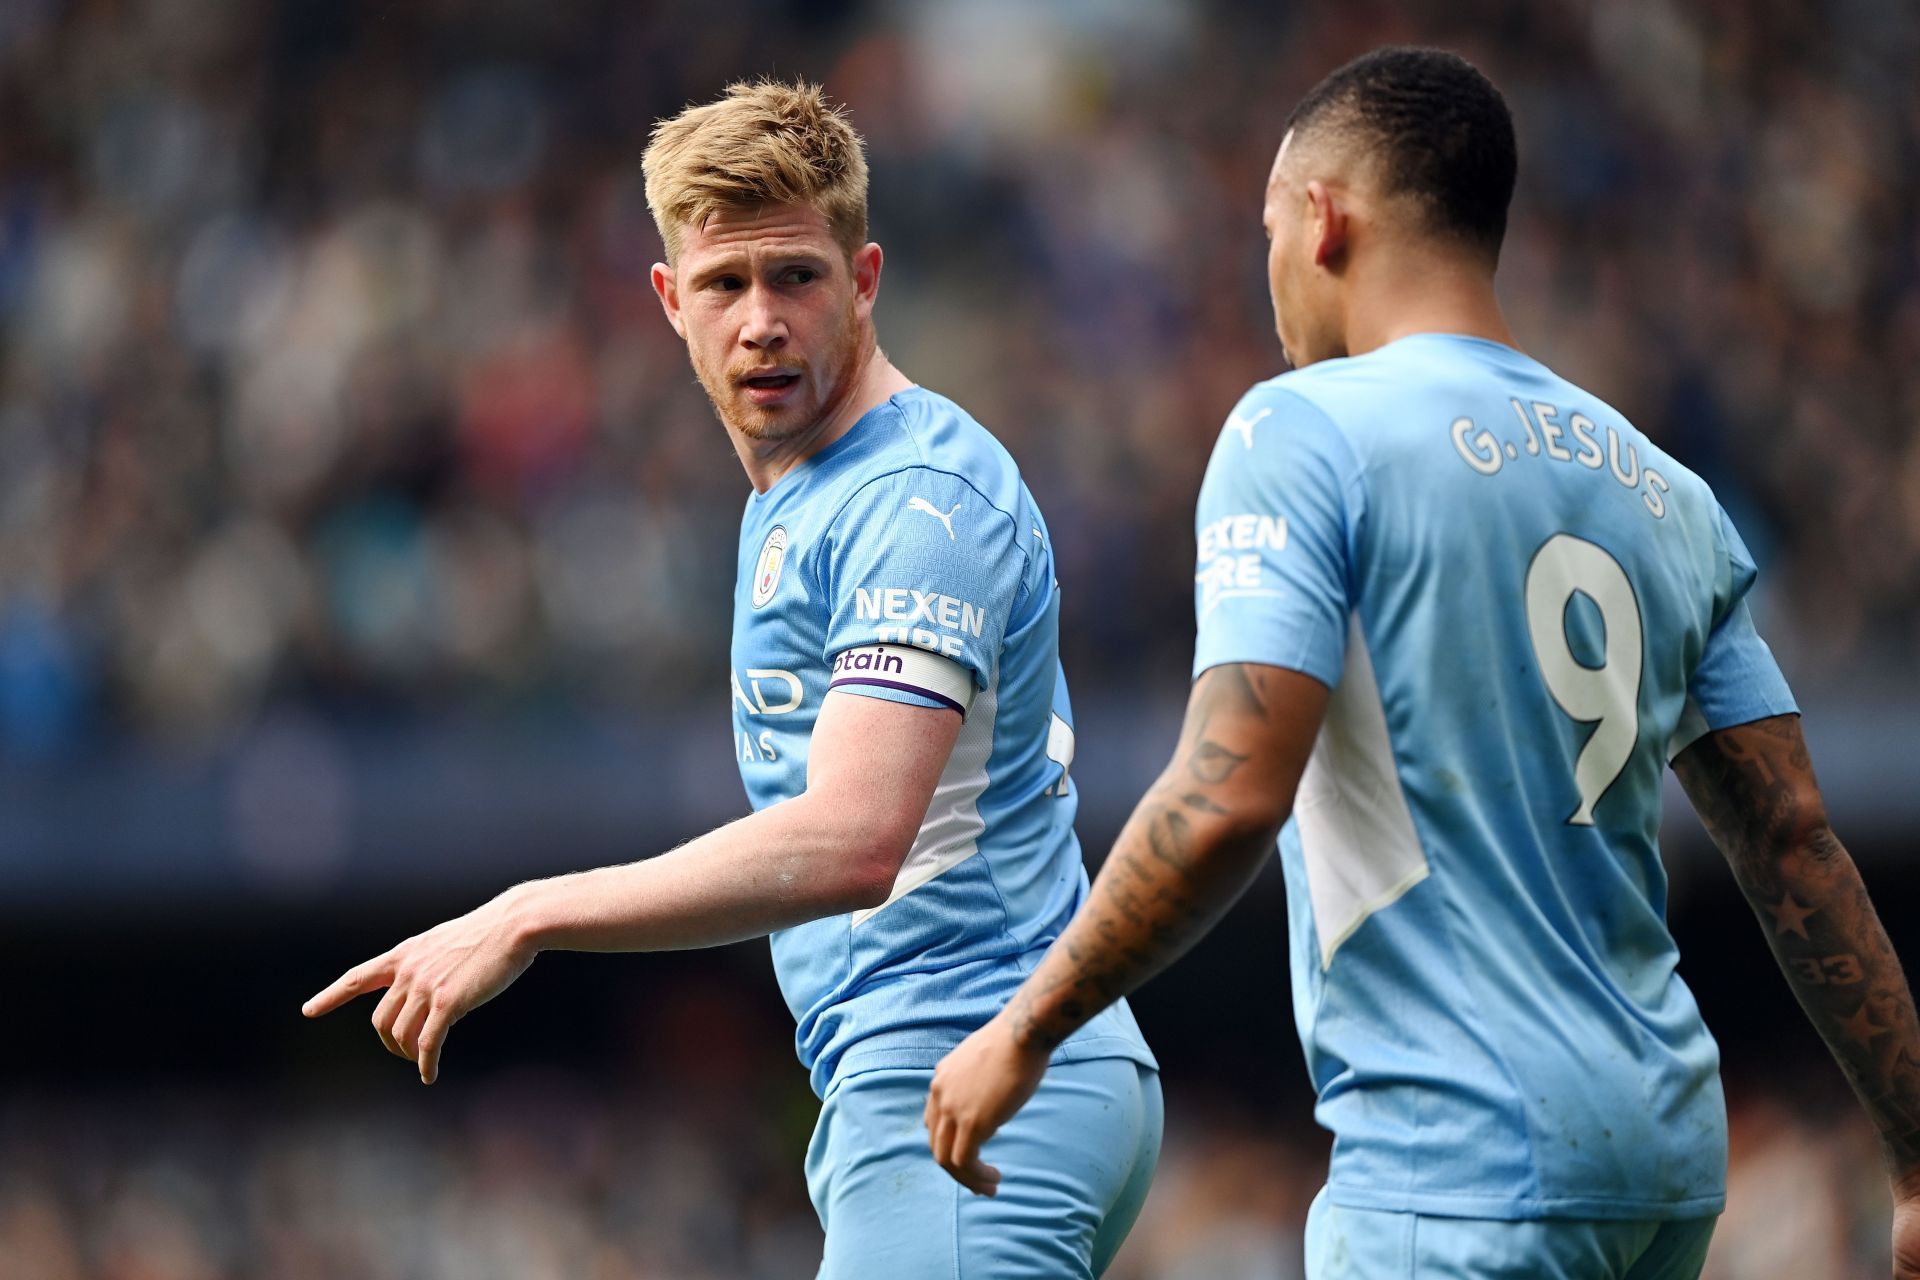 Kevin de Bruyne was absolutely brilliant.